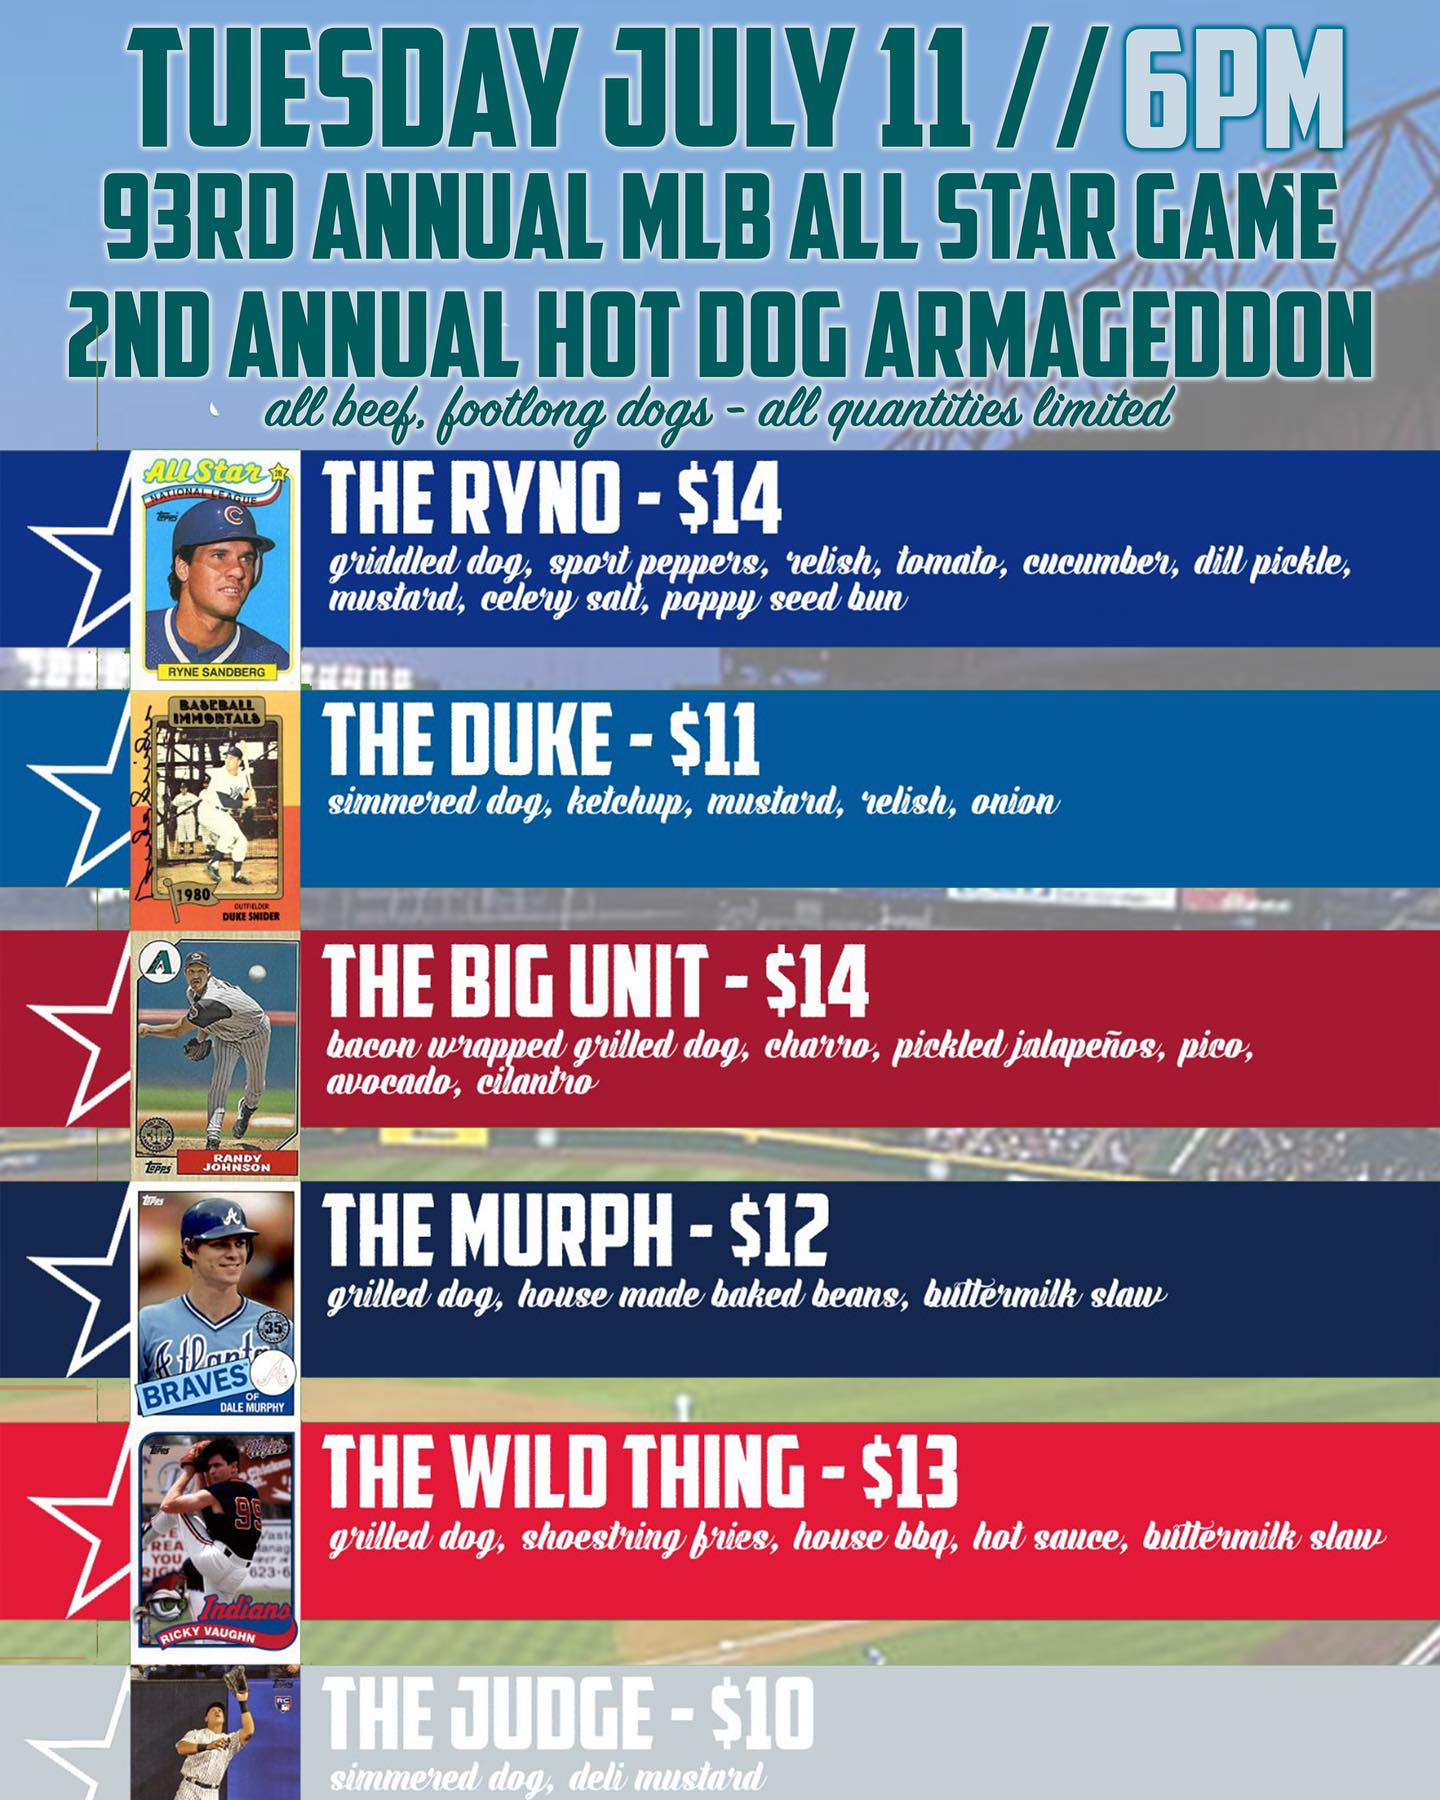 2nd Annual Hot Dog Armageddon and MLB All Star Game watch party